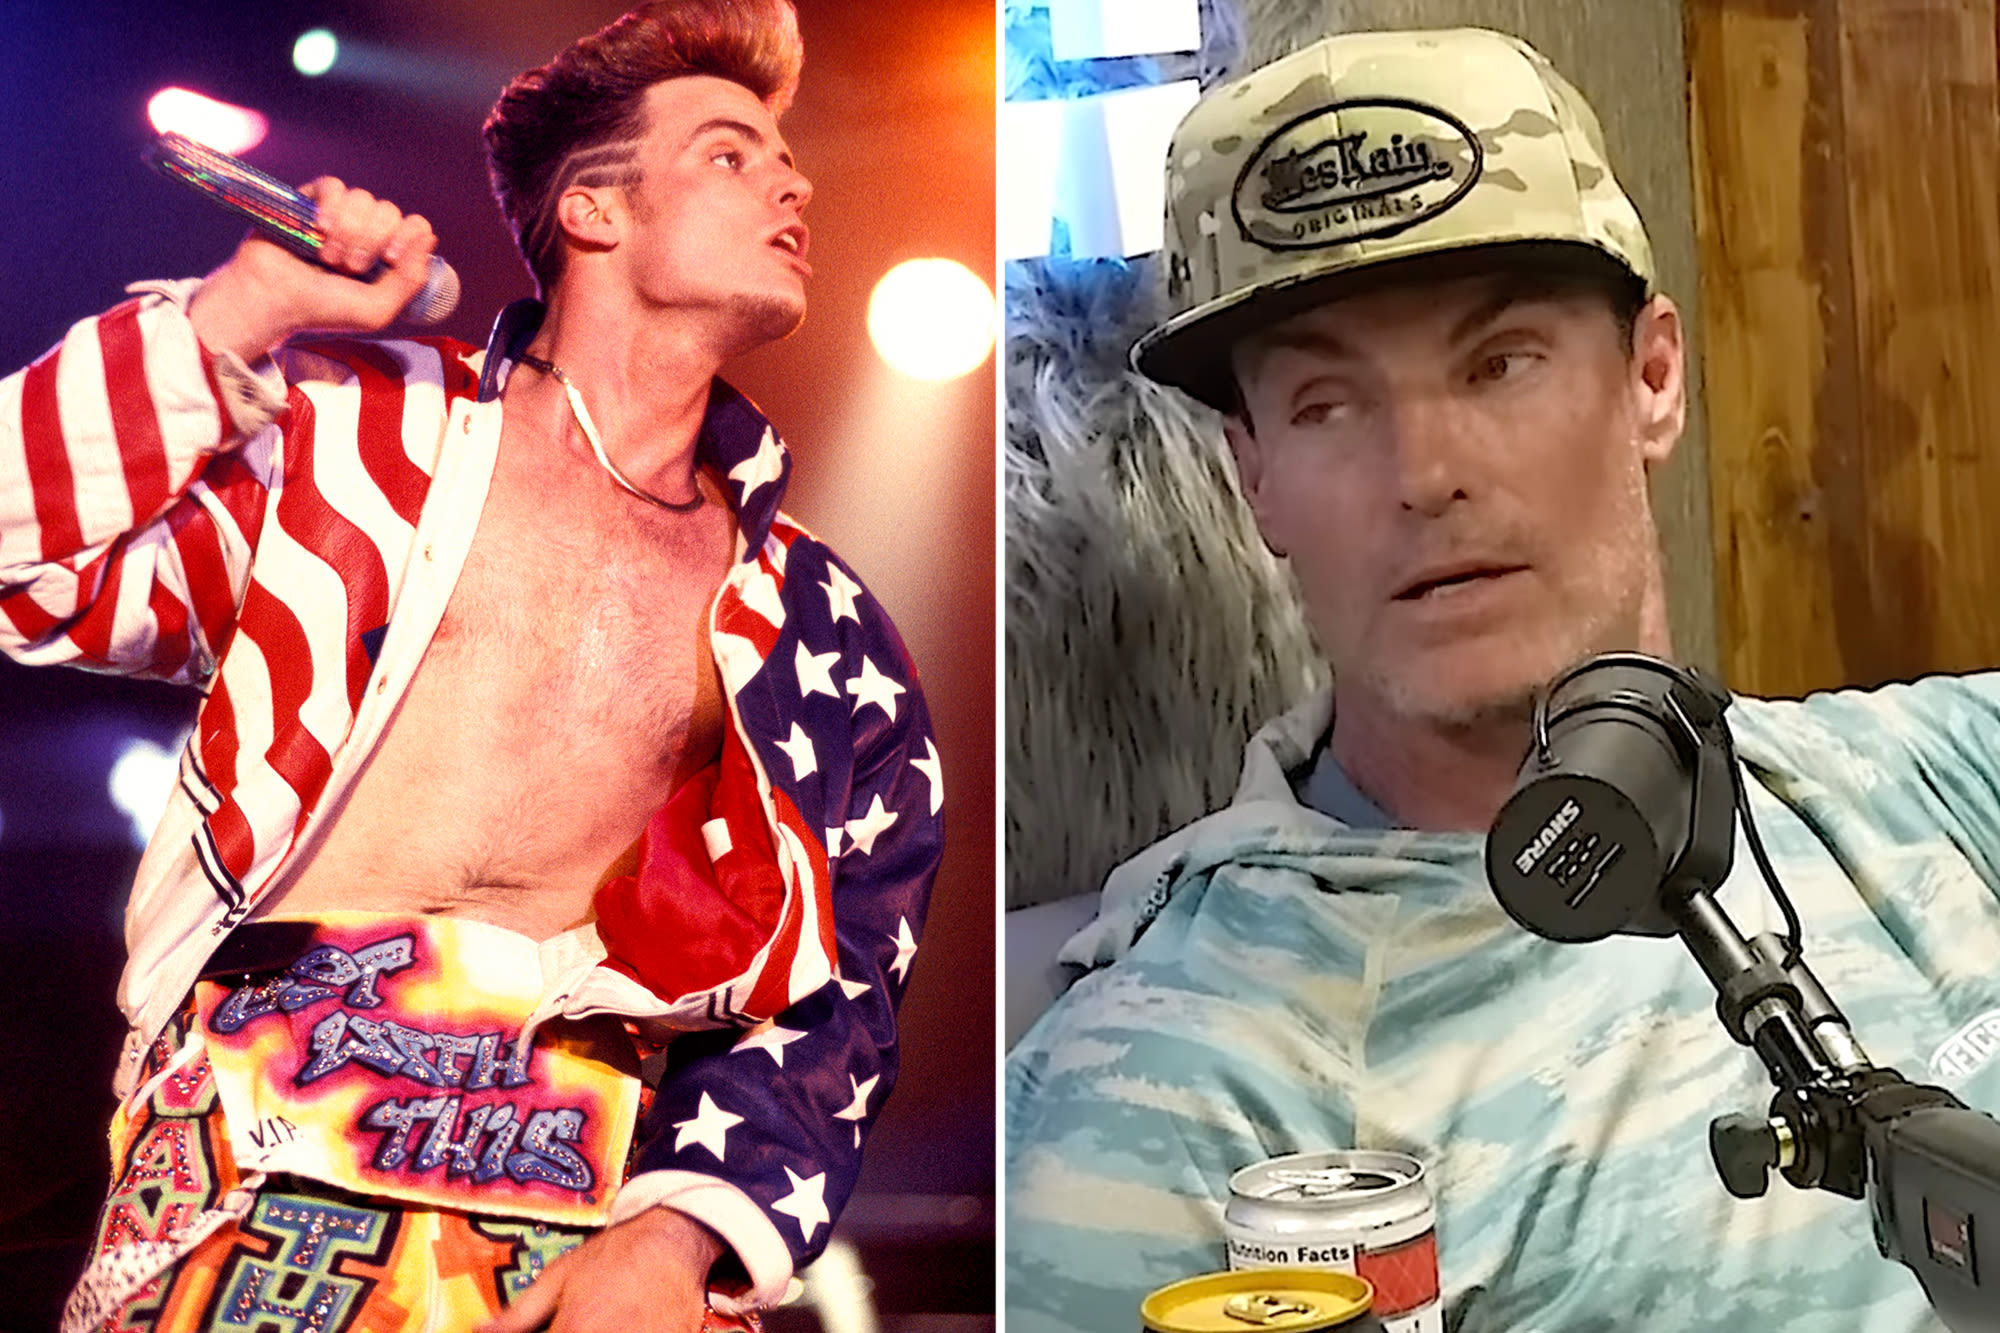 Unlike others in the industry, Vanilla Ice stayed rich off real estate after music career took a nosedive